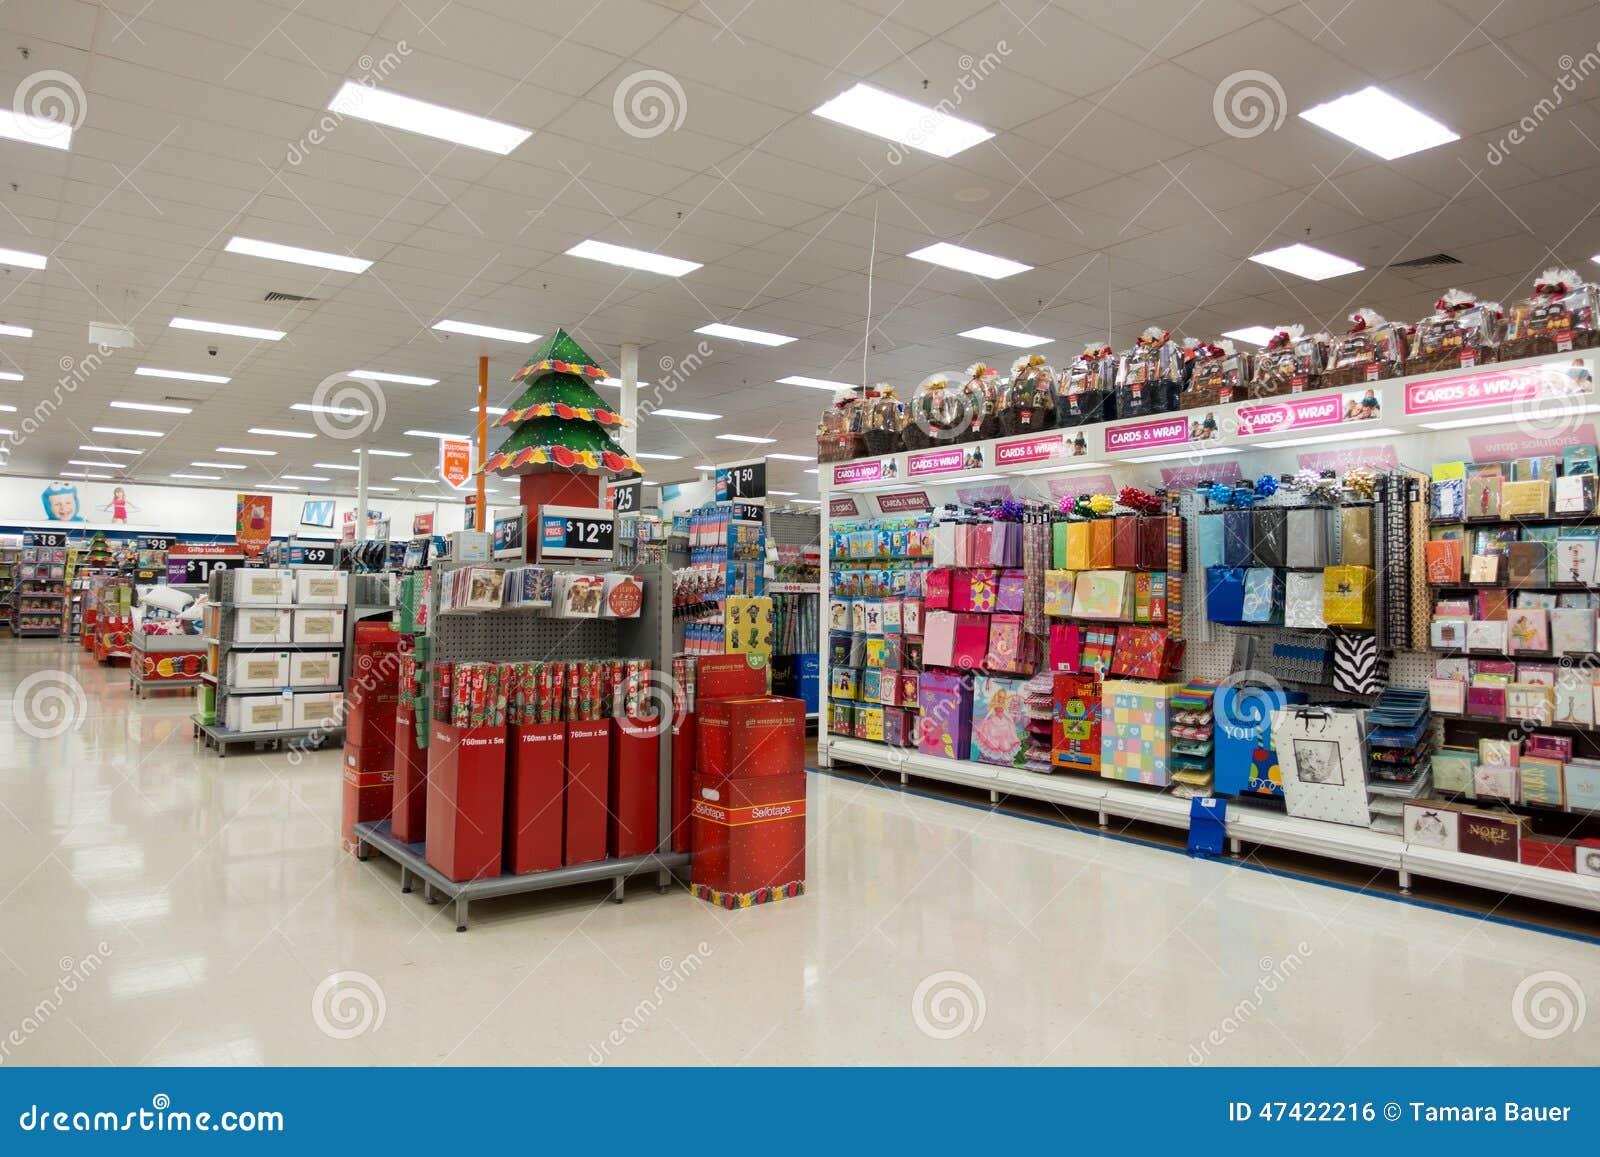  Christmas  Decorations  Big W Superstore Editorial Photo 